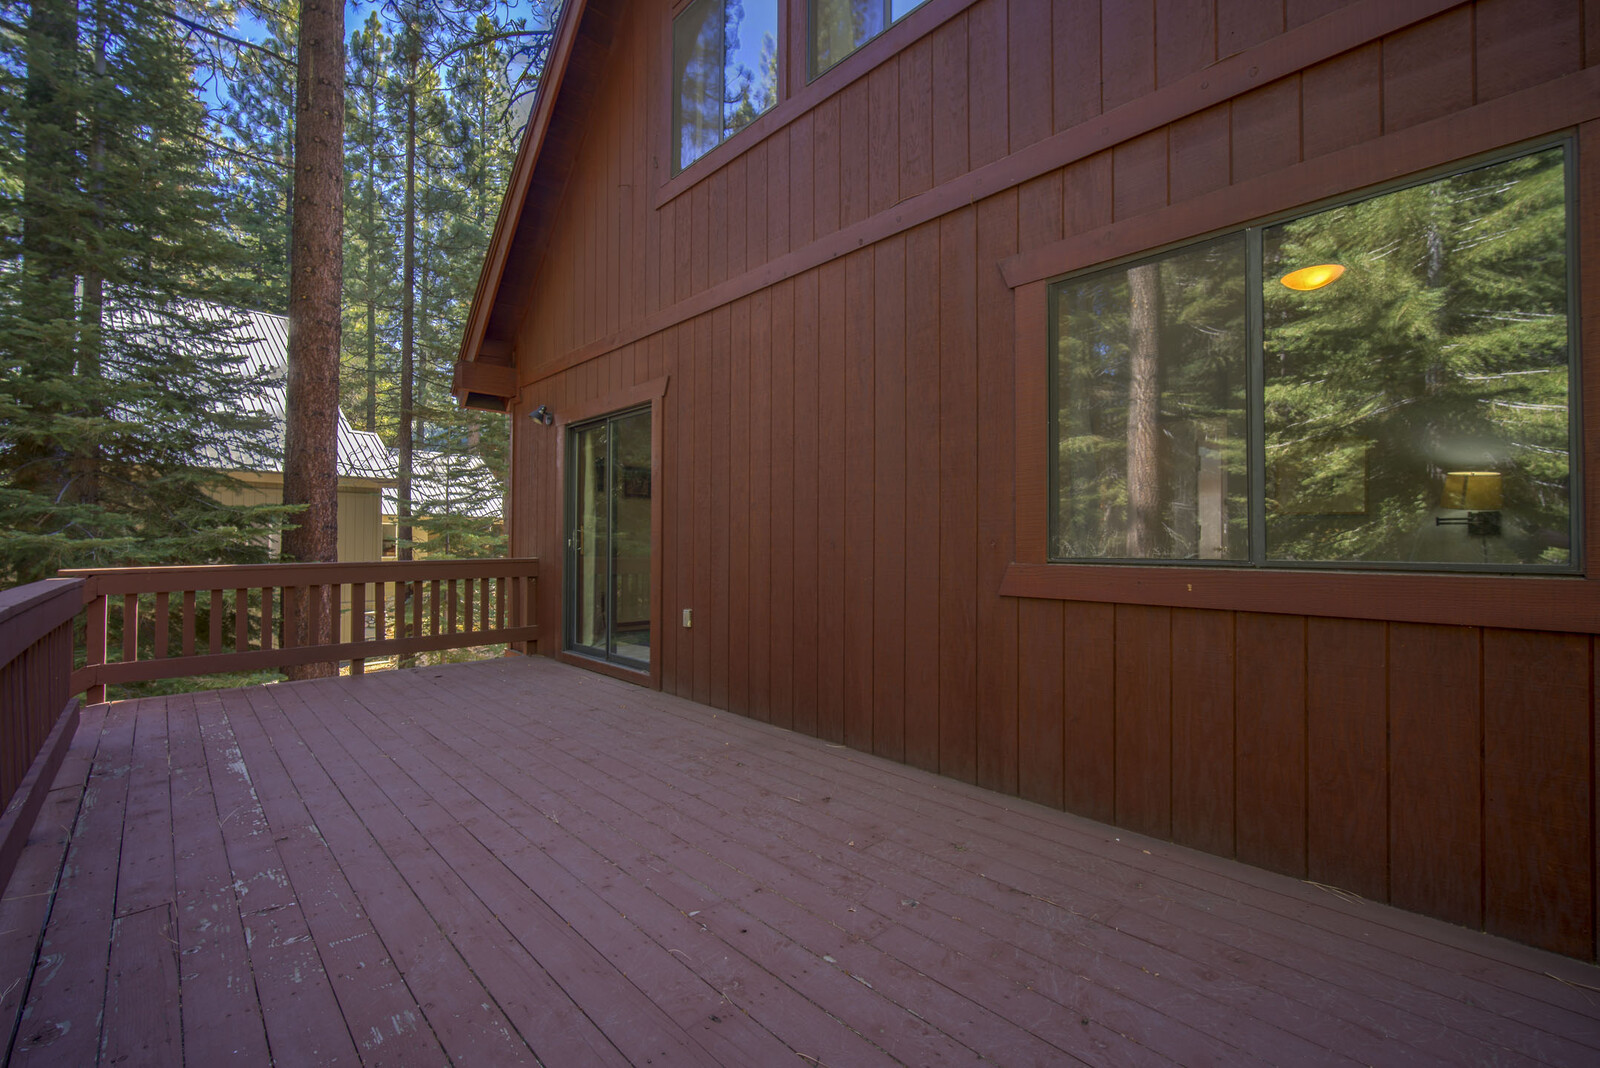 Tahoe Donner Low Elevation porch1